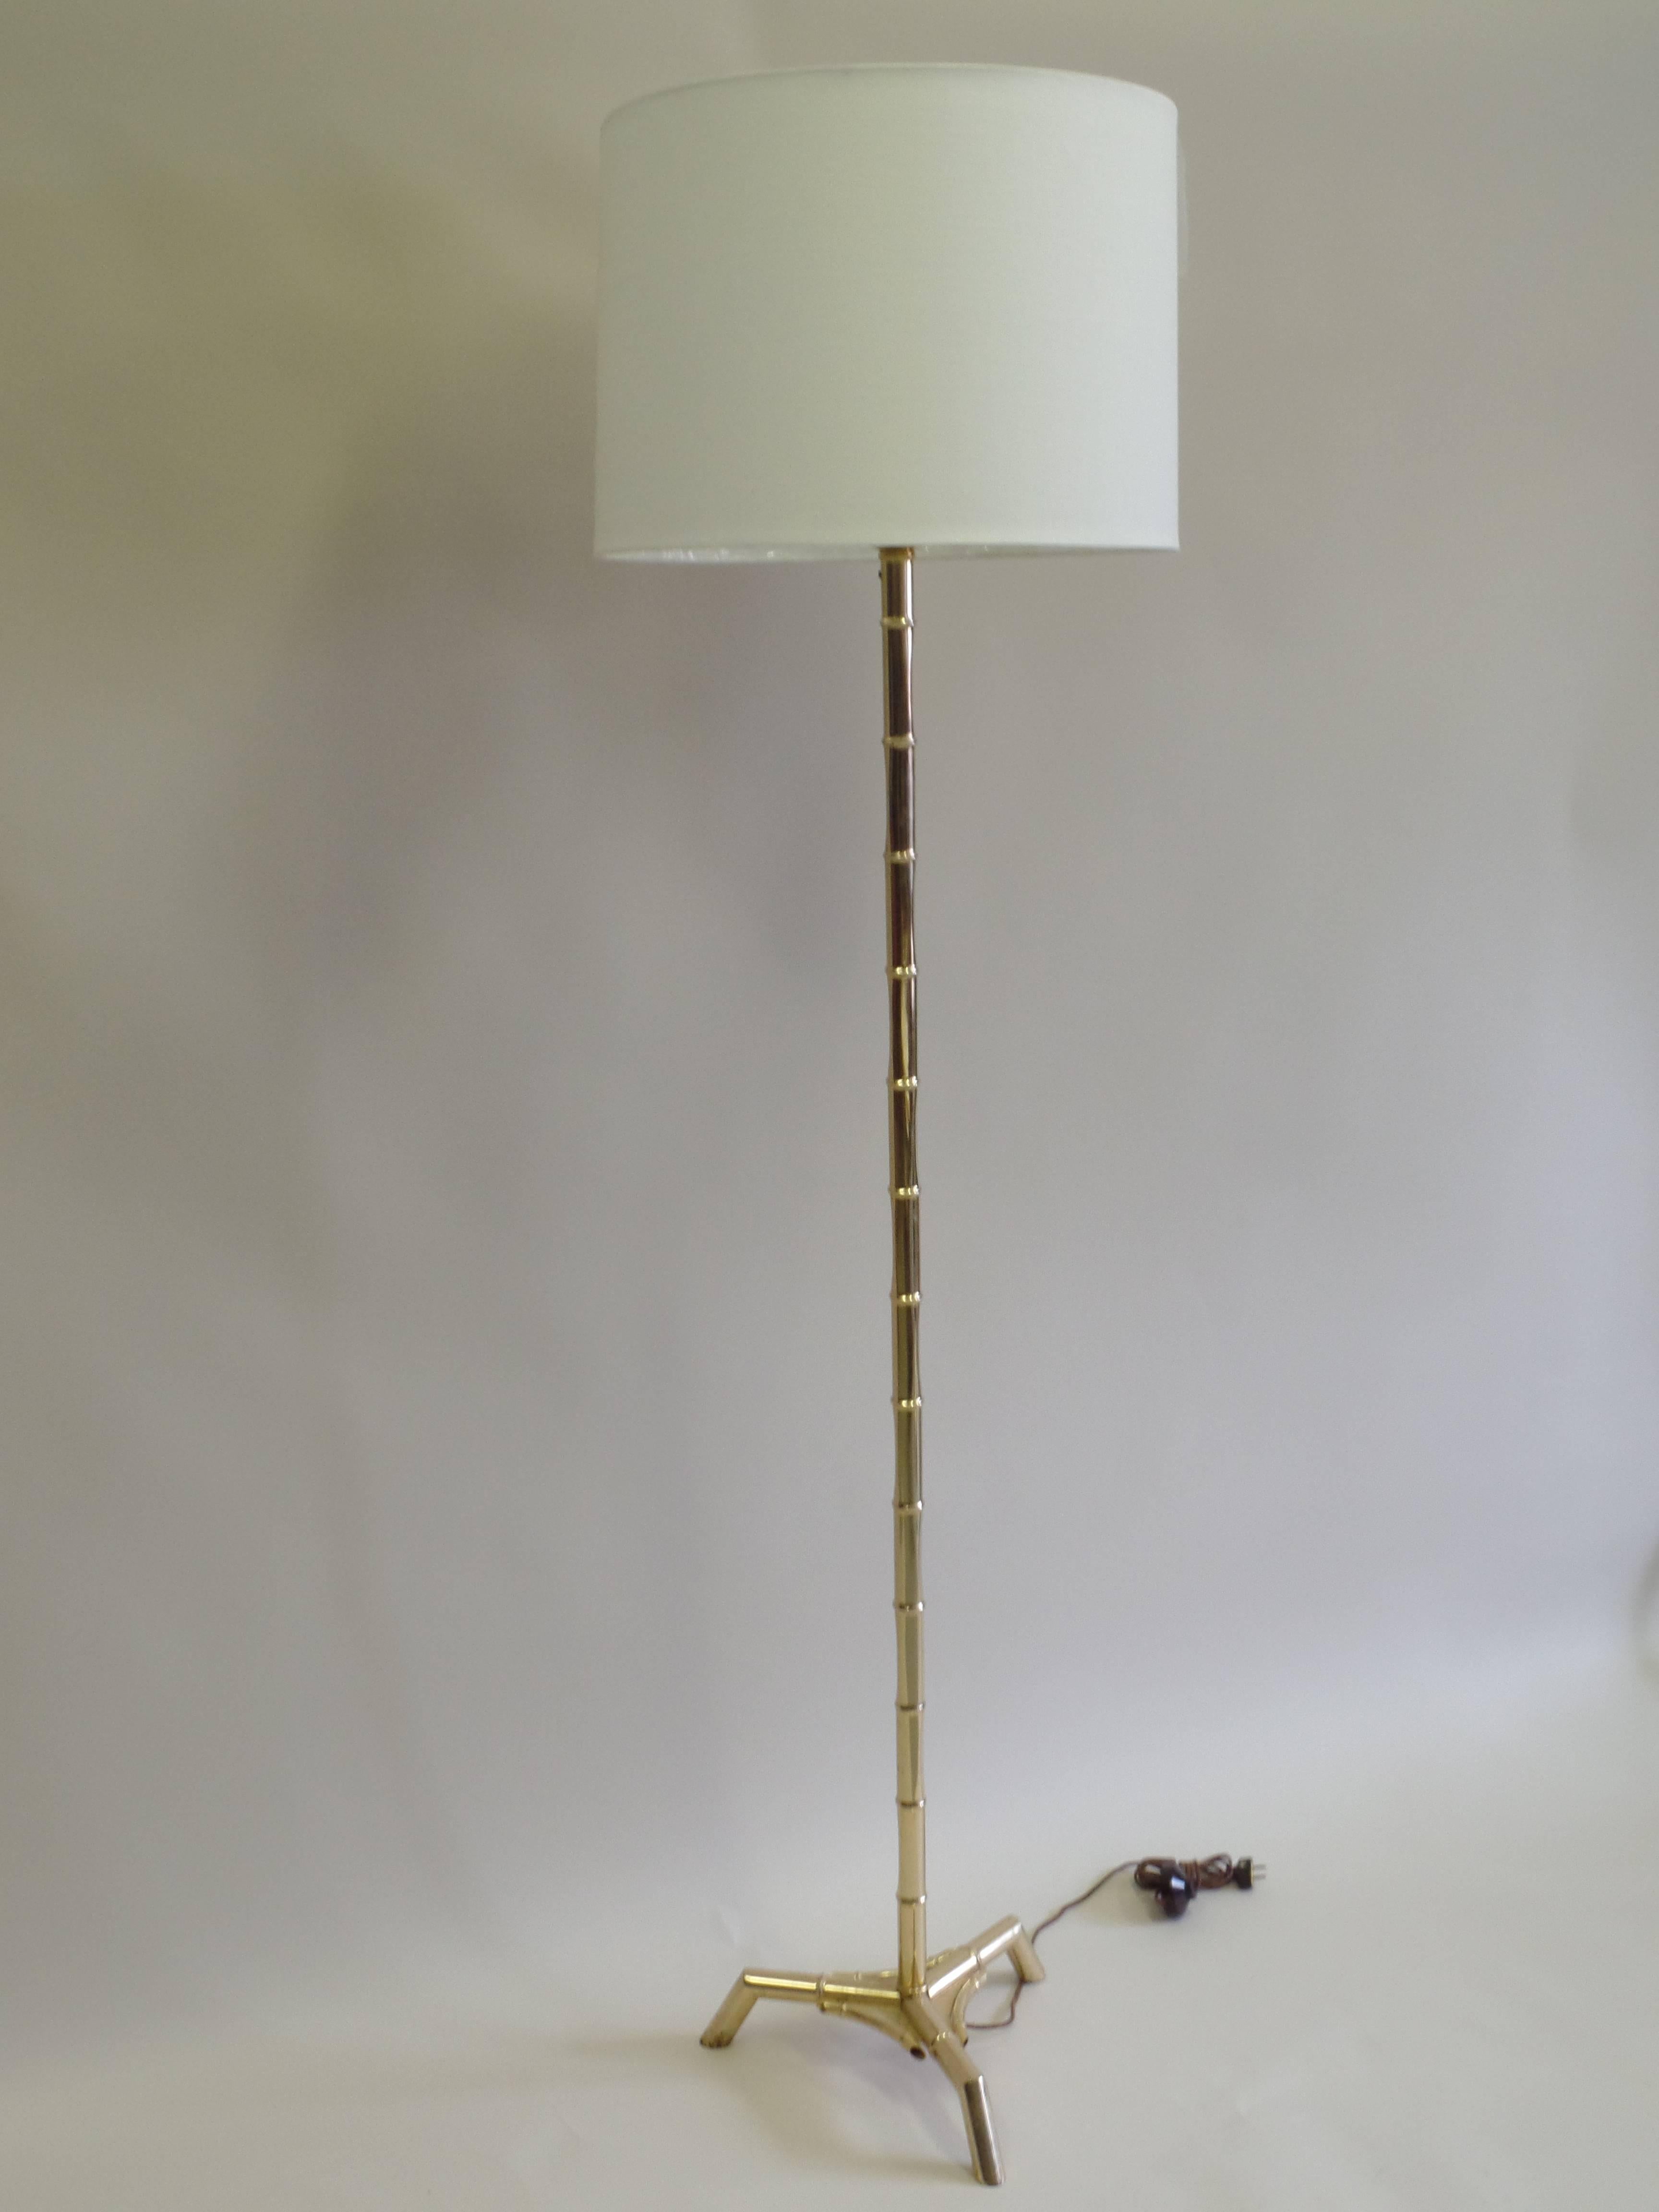 Pair of Elegant French Mid-Century brass faux bamboo floor lamps in the Modern Neoclassical spirit resting on a tripod base by Maison Bagues. 

The height shown is 75